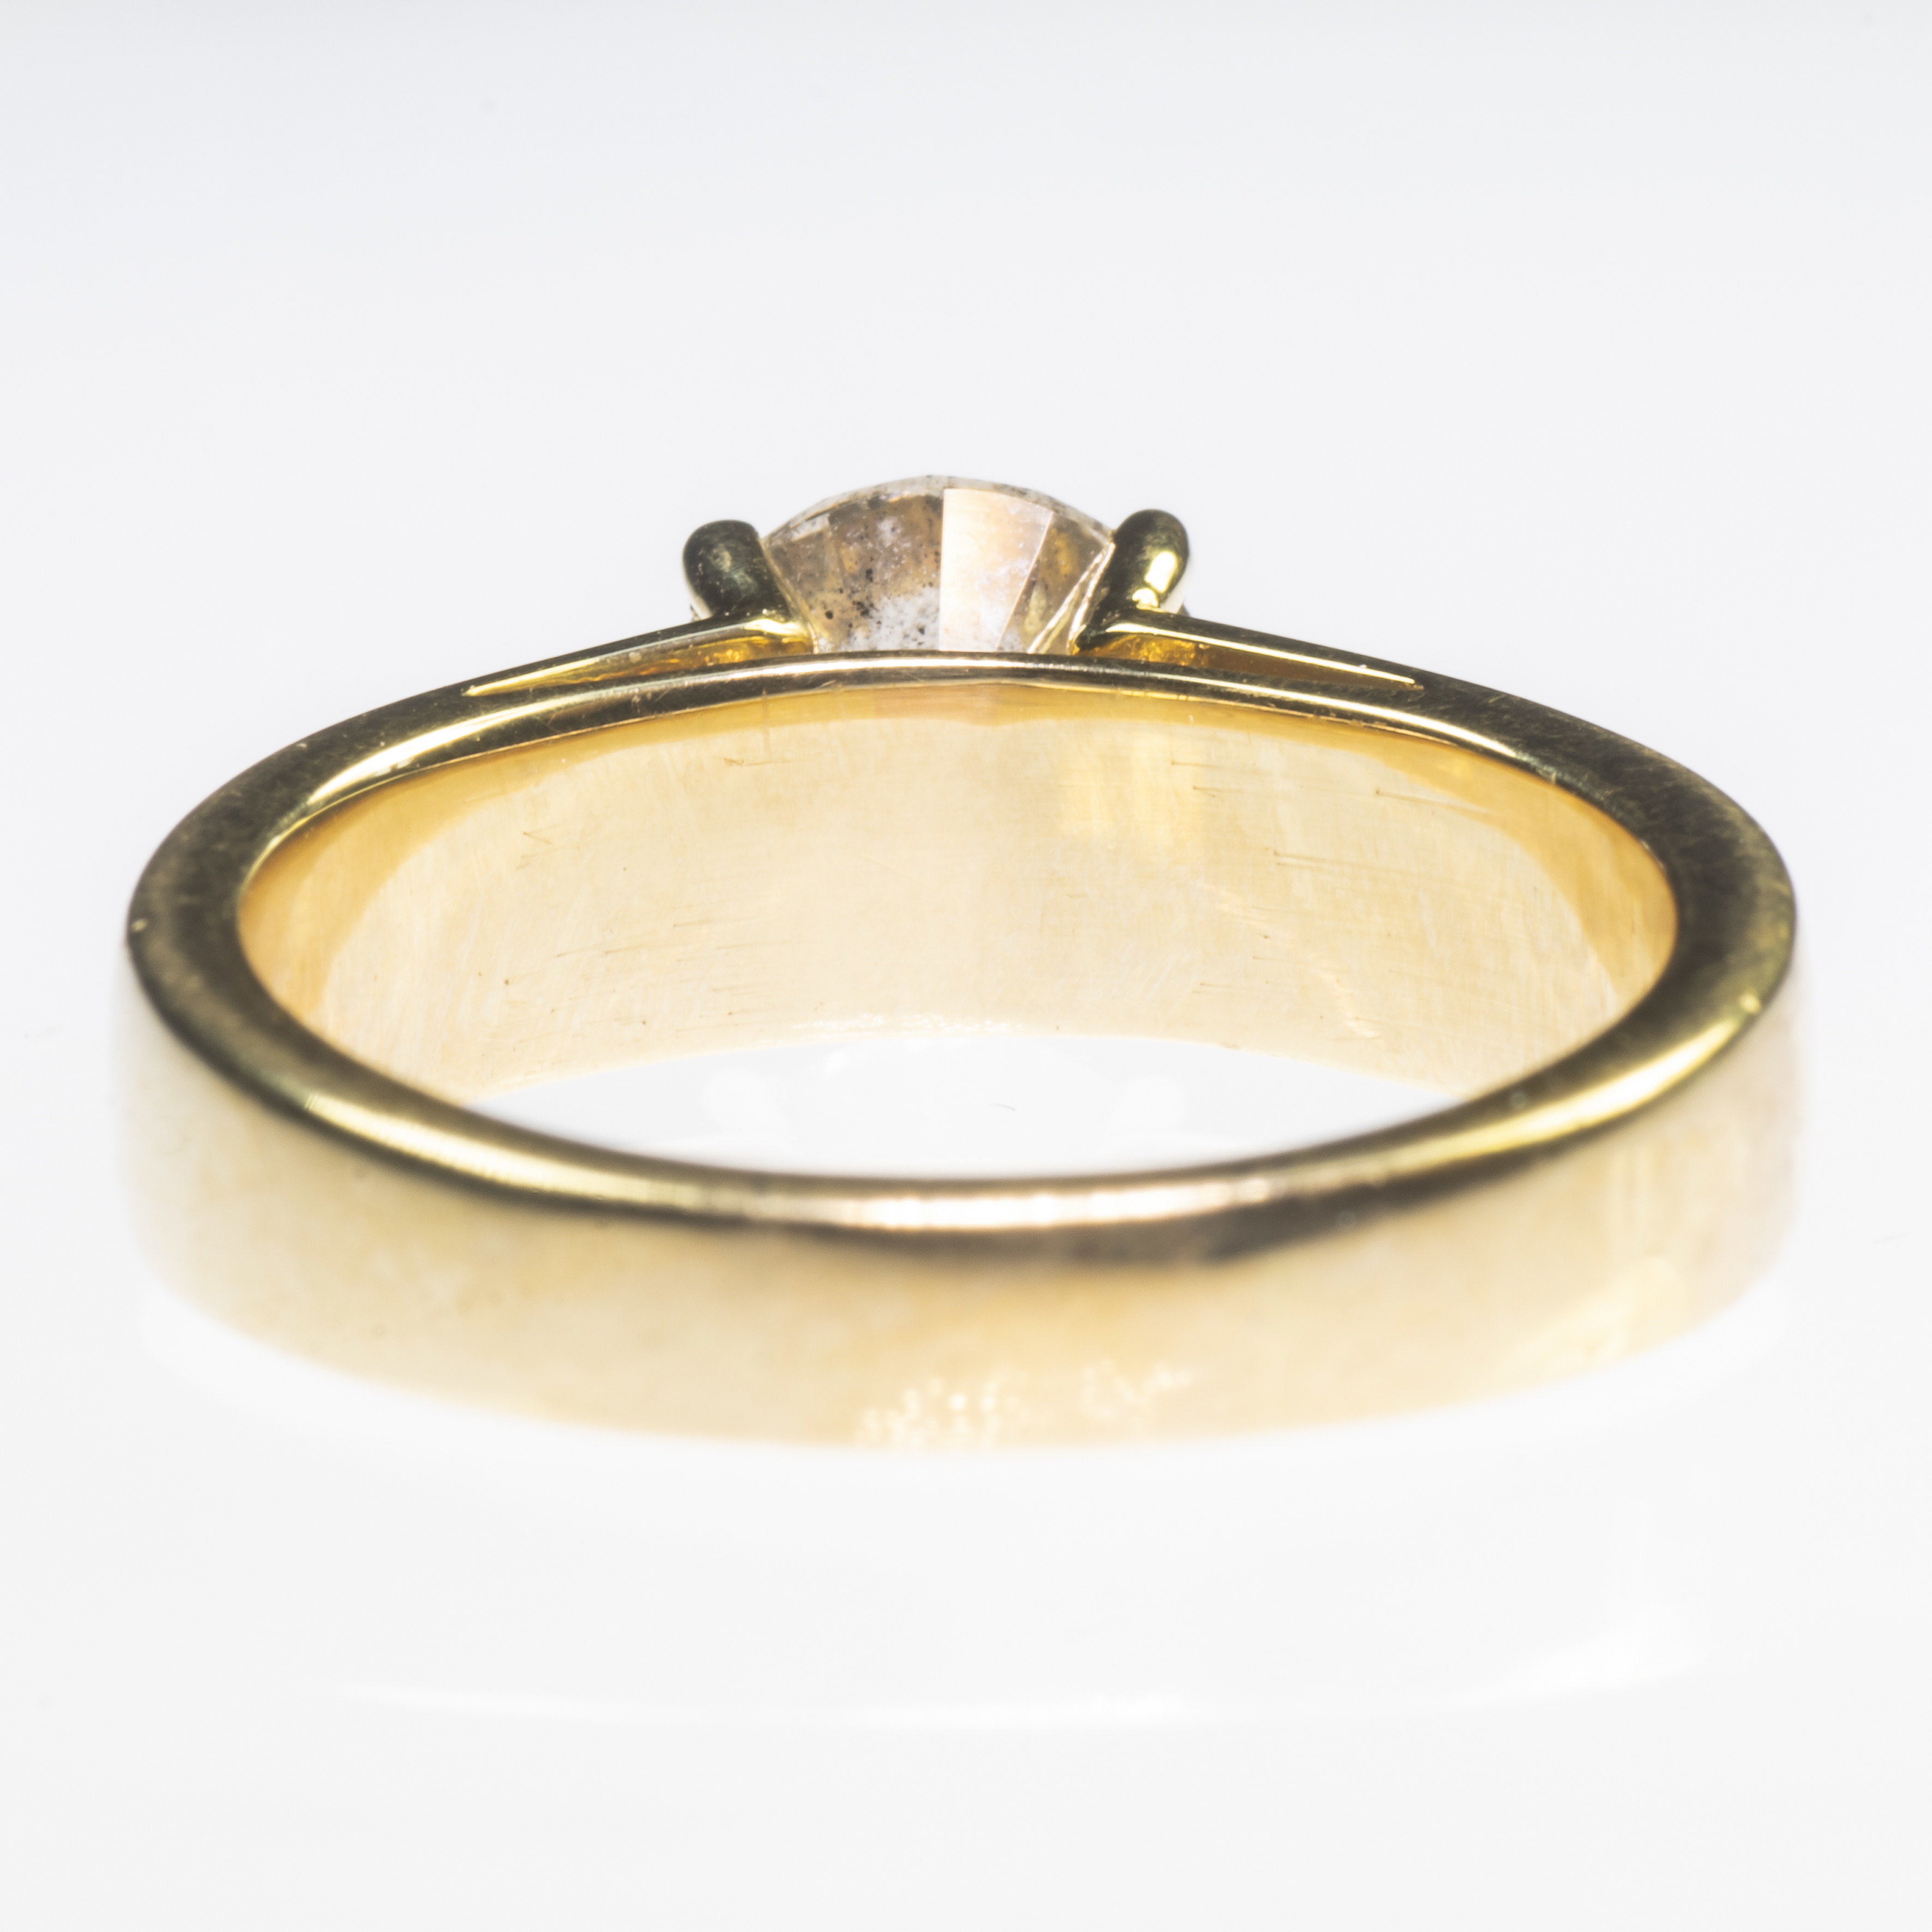 AN 18CT YELLOW GOLD AND BRILLIANT CUT DIAMOND RING - Image 3 of 3